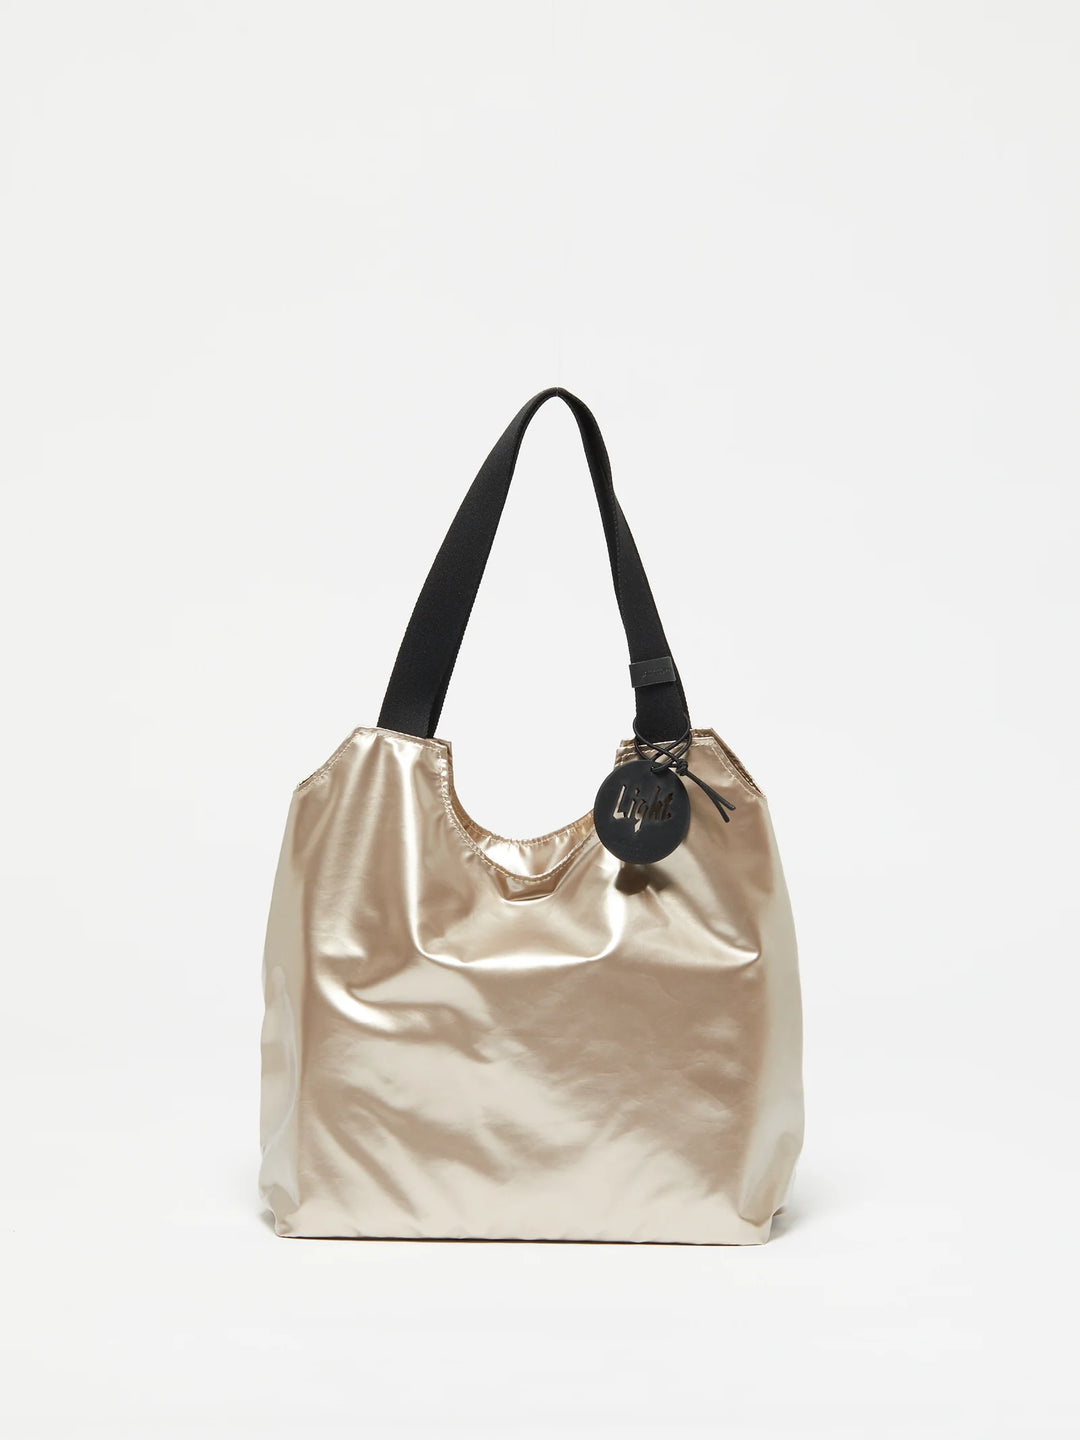 Jack Gomme Tilly Light Shopping Bag - Mother-of-Pearl